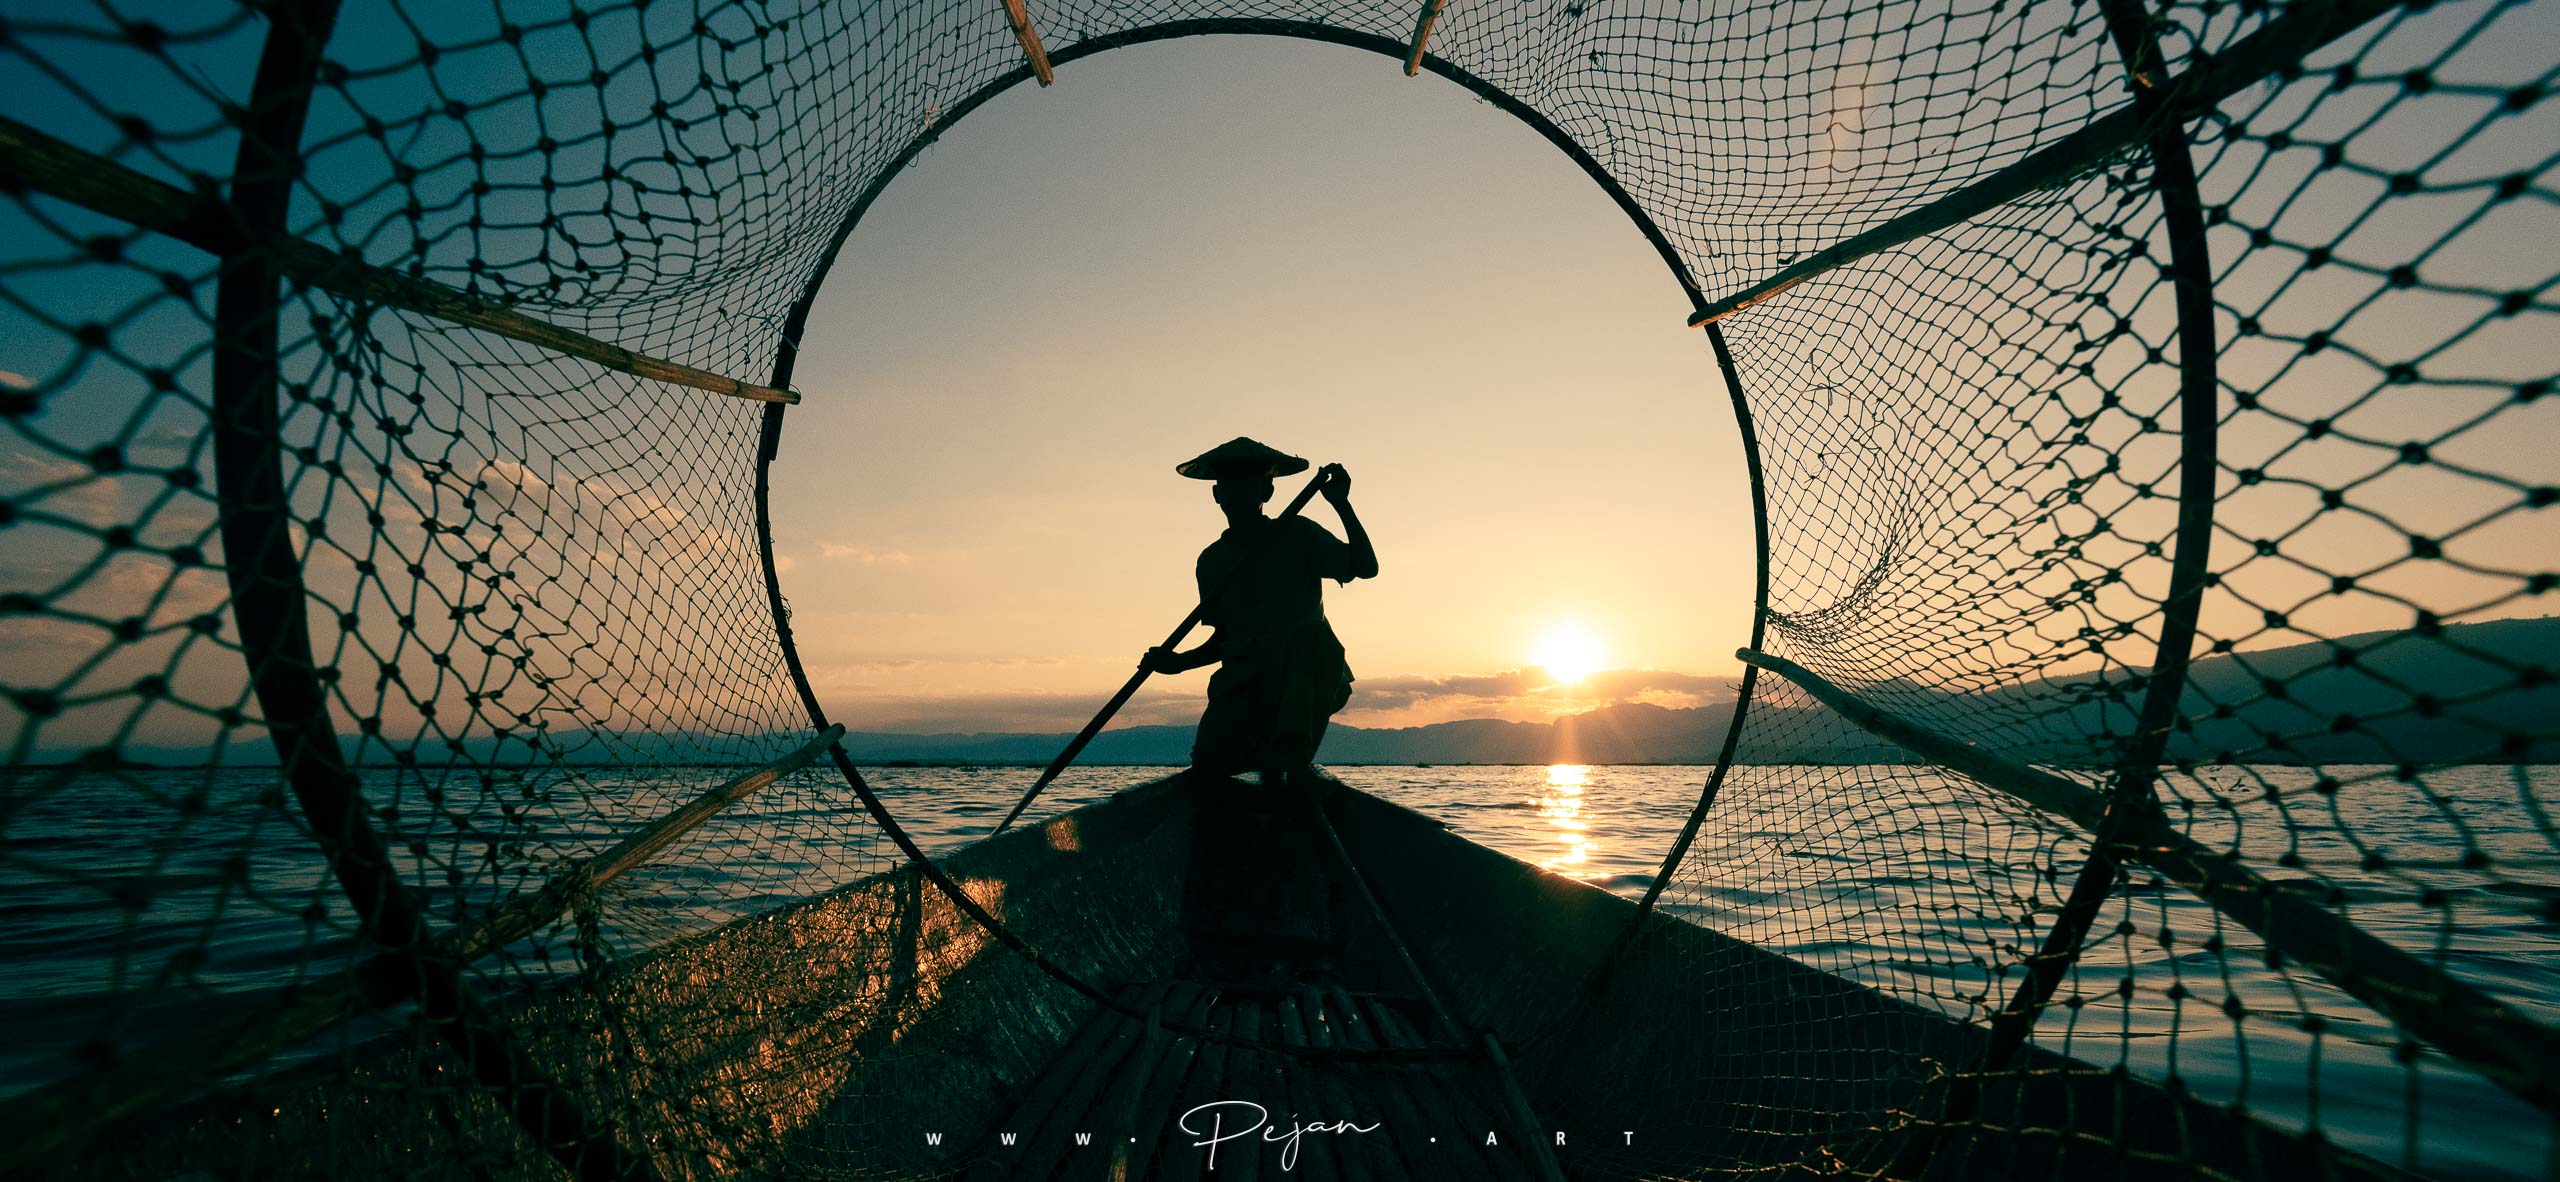 Silhouette of an Intha fisherman crouching on his boat at sunrise. Iconic photograph taken through a circular net, which centers the subject. Inle Lake, Myanmar